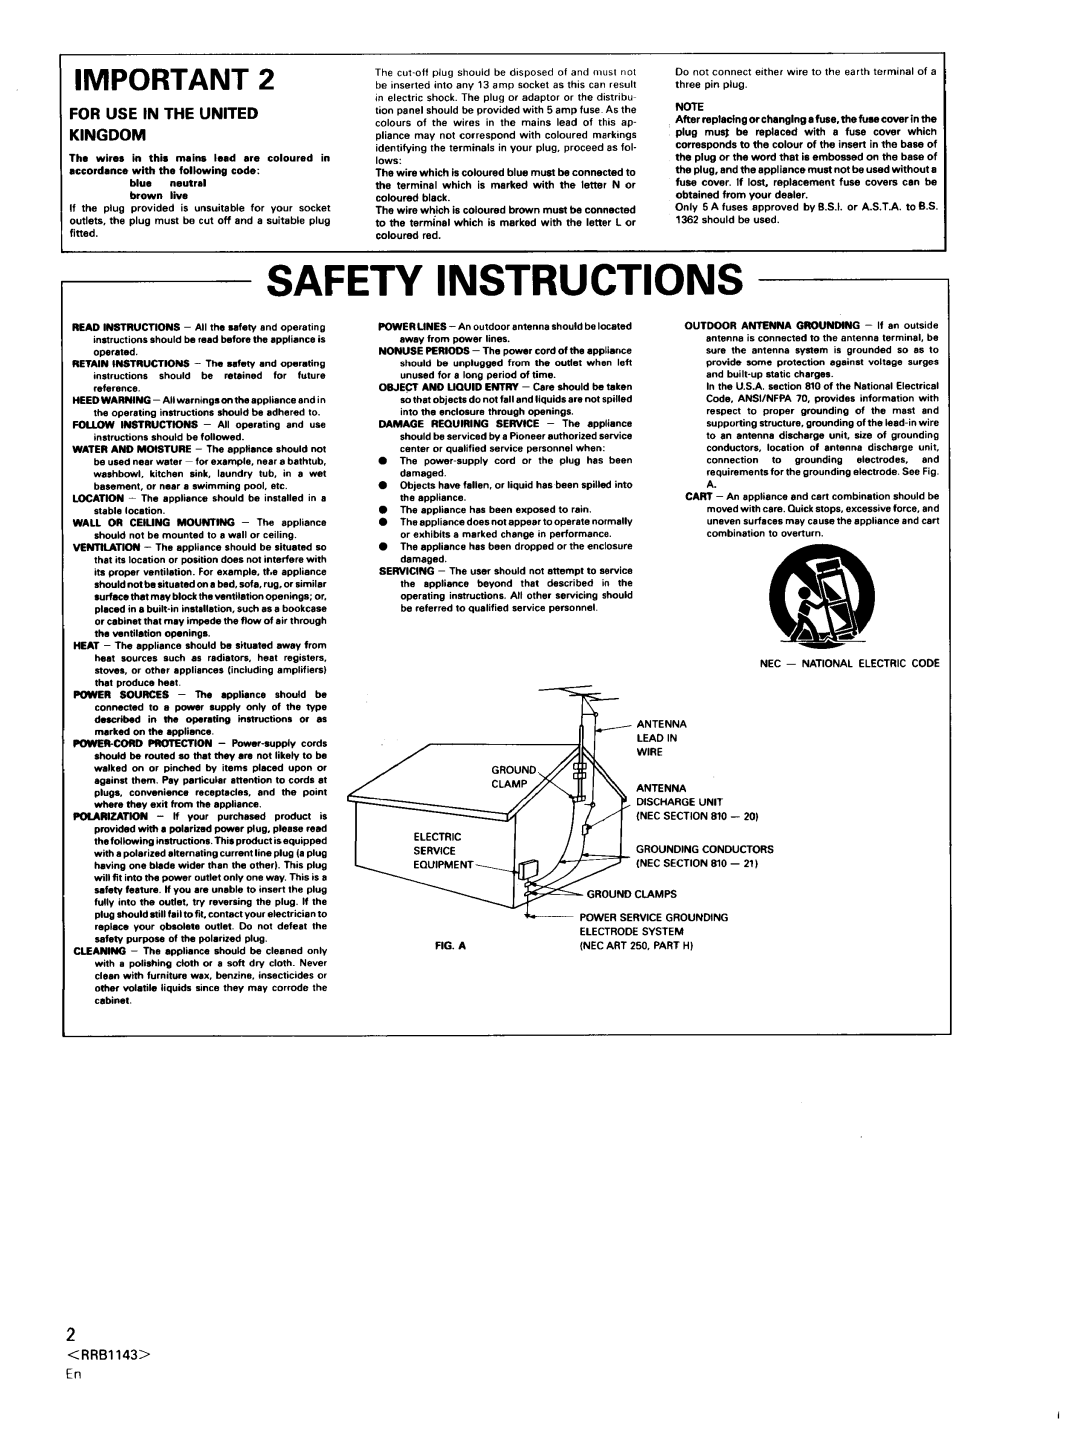 Pioneer CT-W803RS, CT-W603RS operating instructions Safety Instructions, For Use In The United Kingdom 